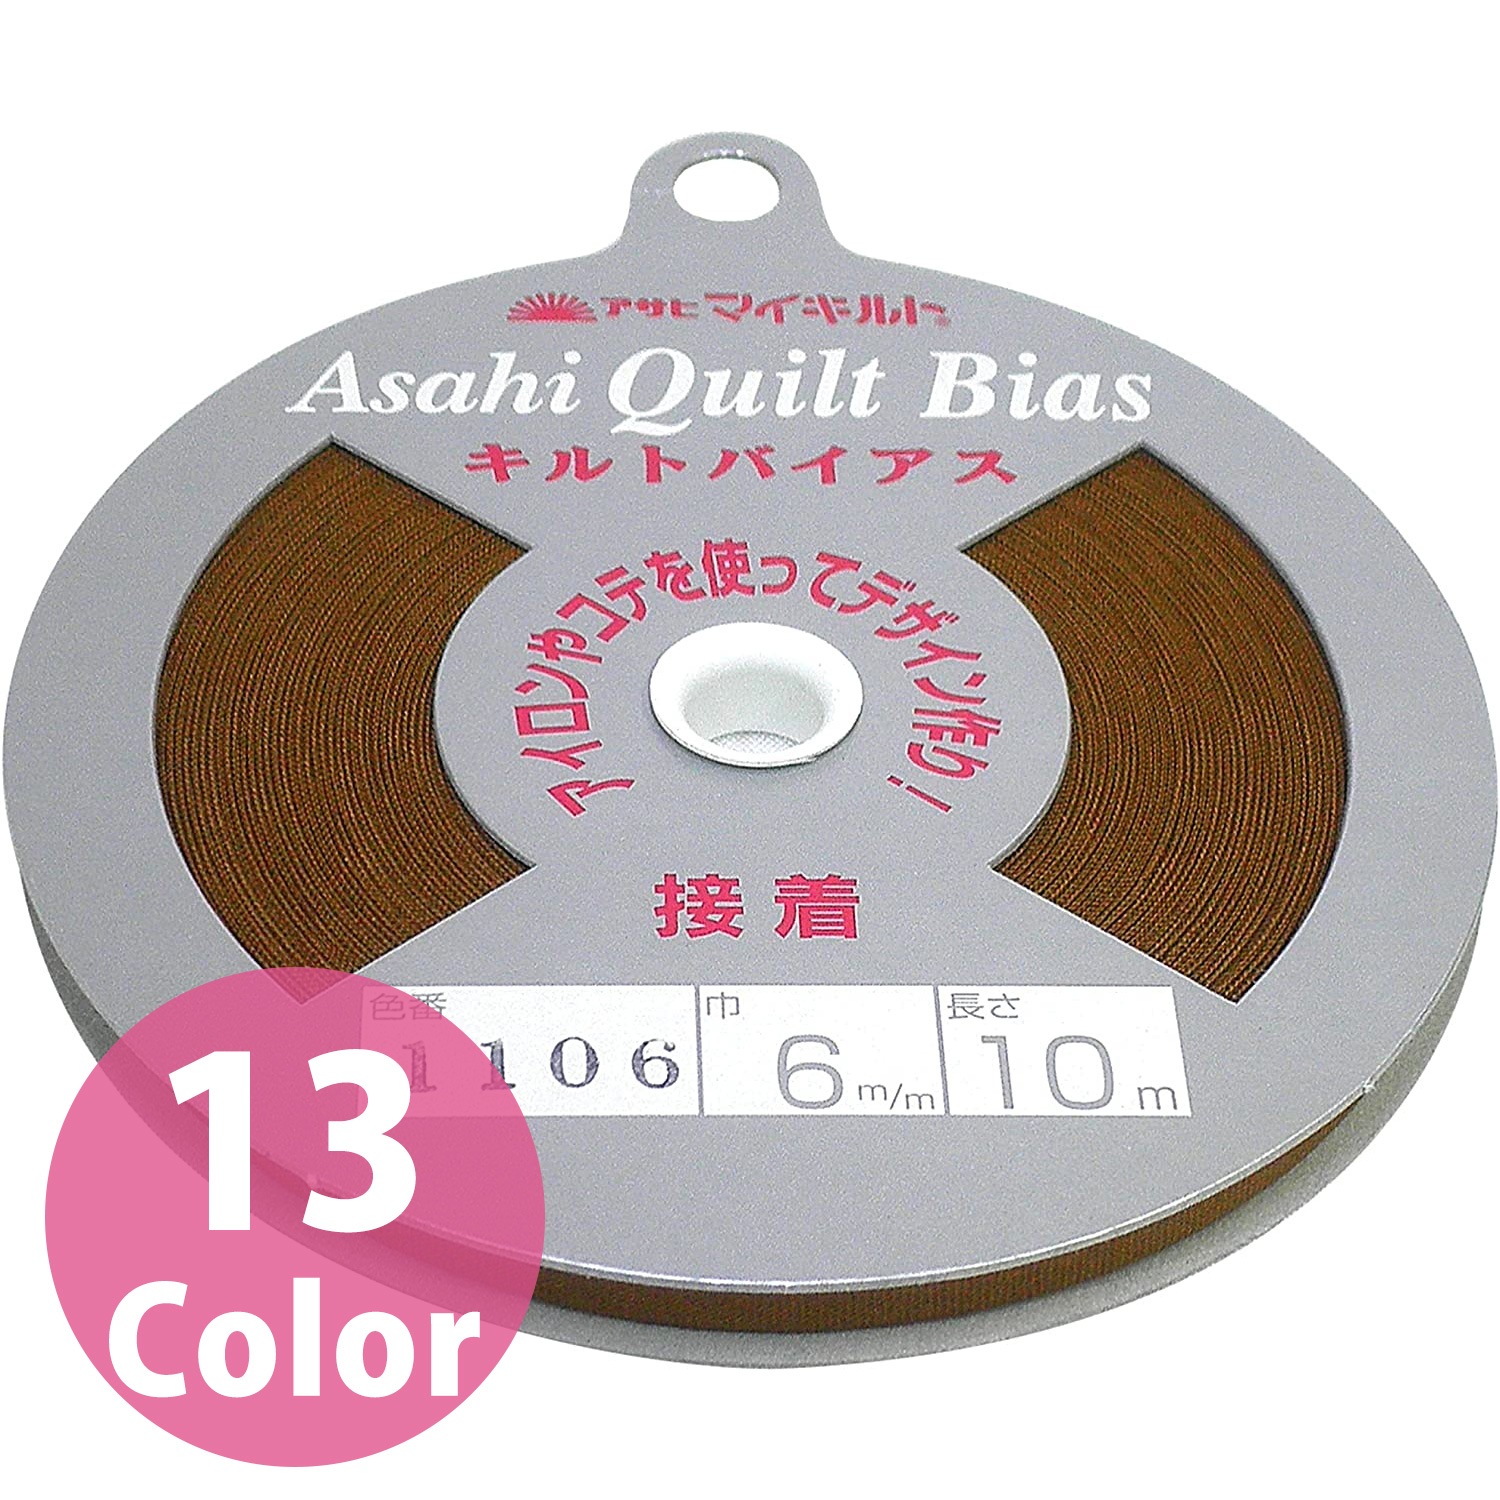 Iron-on Adhesive Bias Tape for Quilting, width 6mm, 10m roll (pcs)